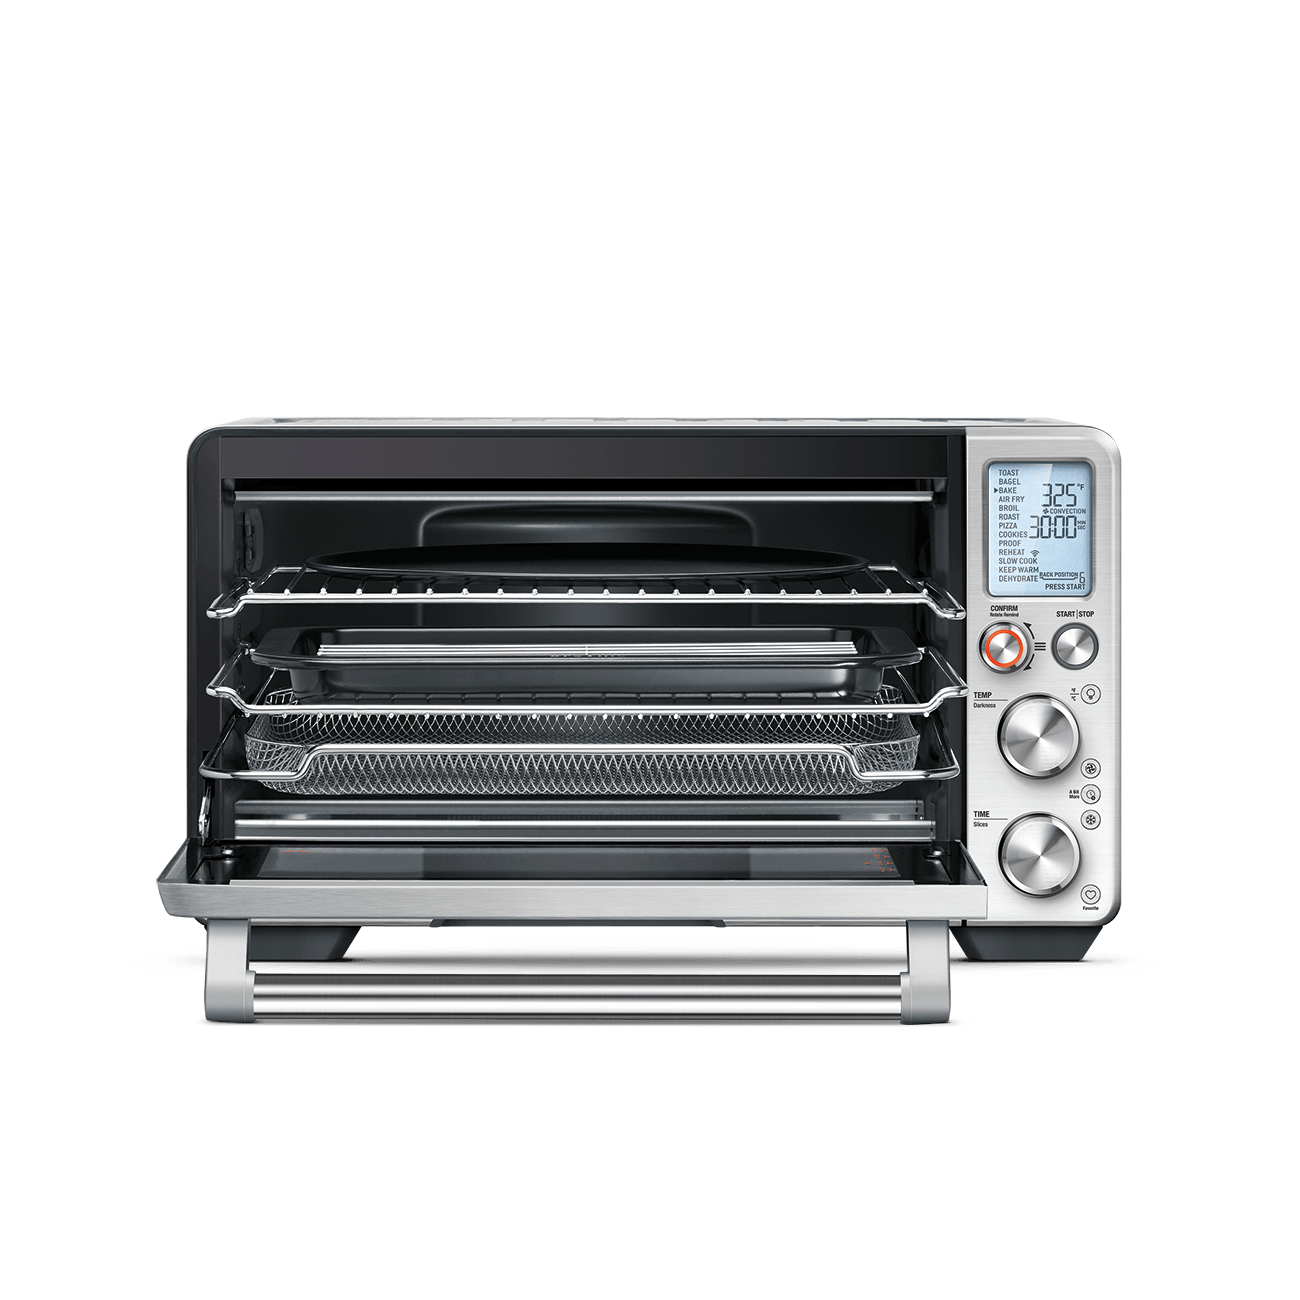 The Breville Joule® Stainless Steel Oven Air Fryer Pro 21.5" x 17.3" x 12.8" - Kitchen Universe